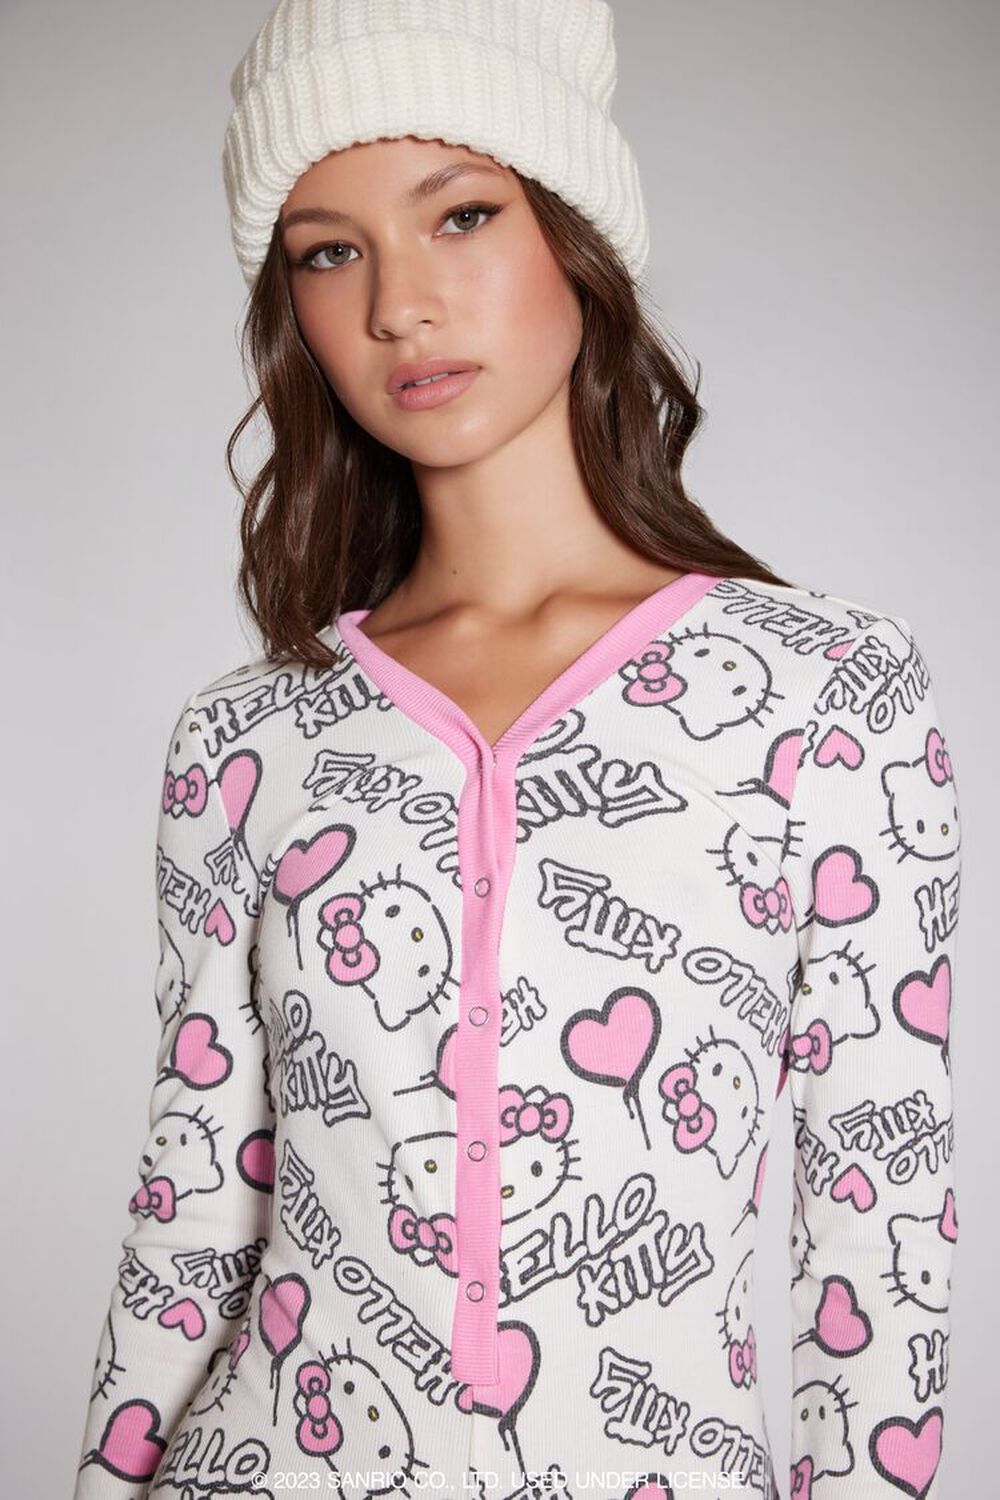 Hello Kitty Quilted Jumpsuit